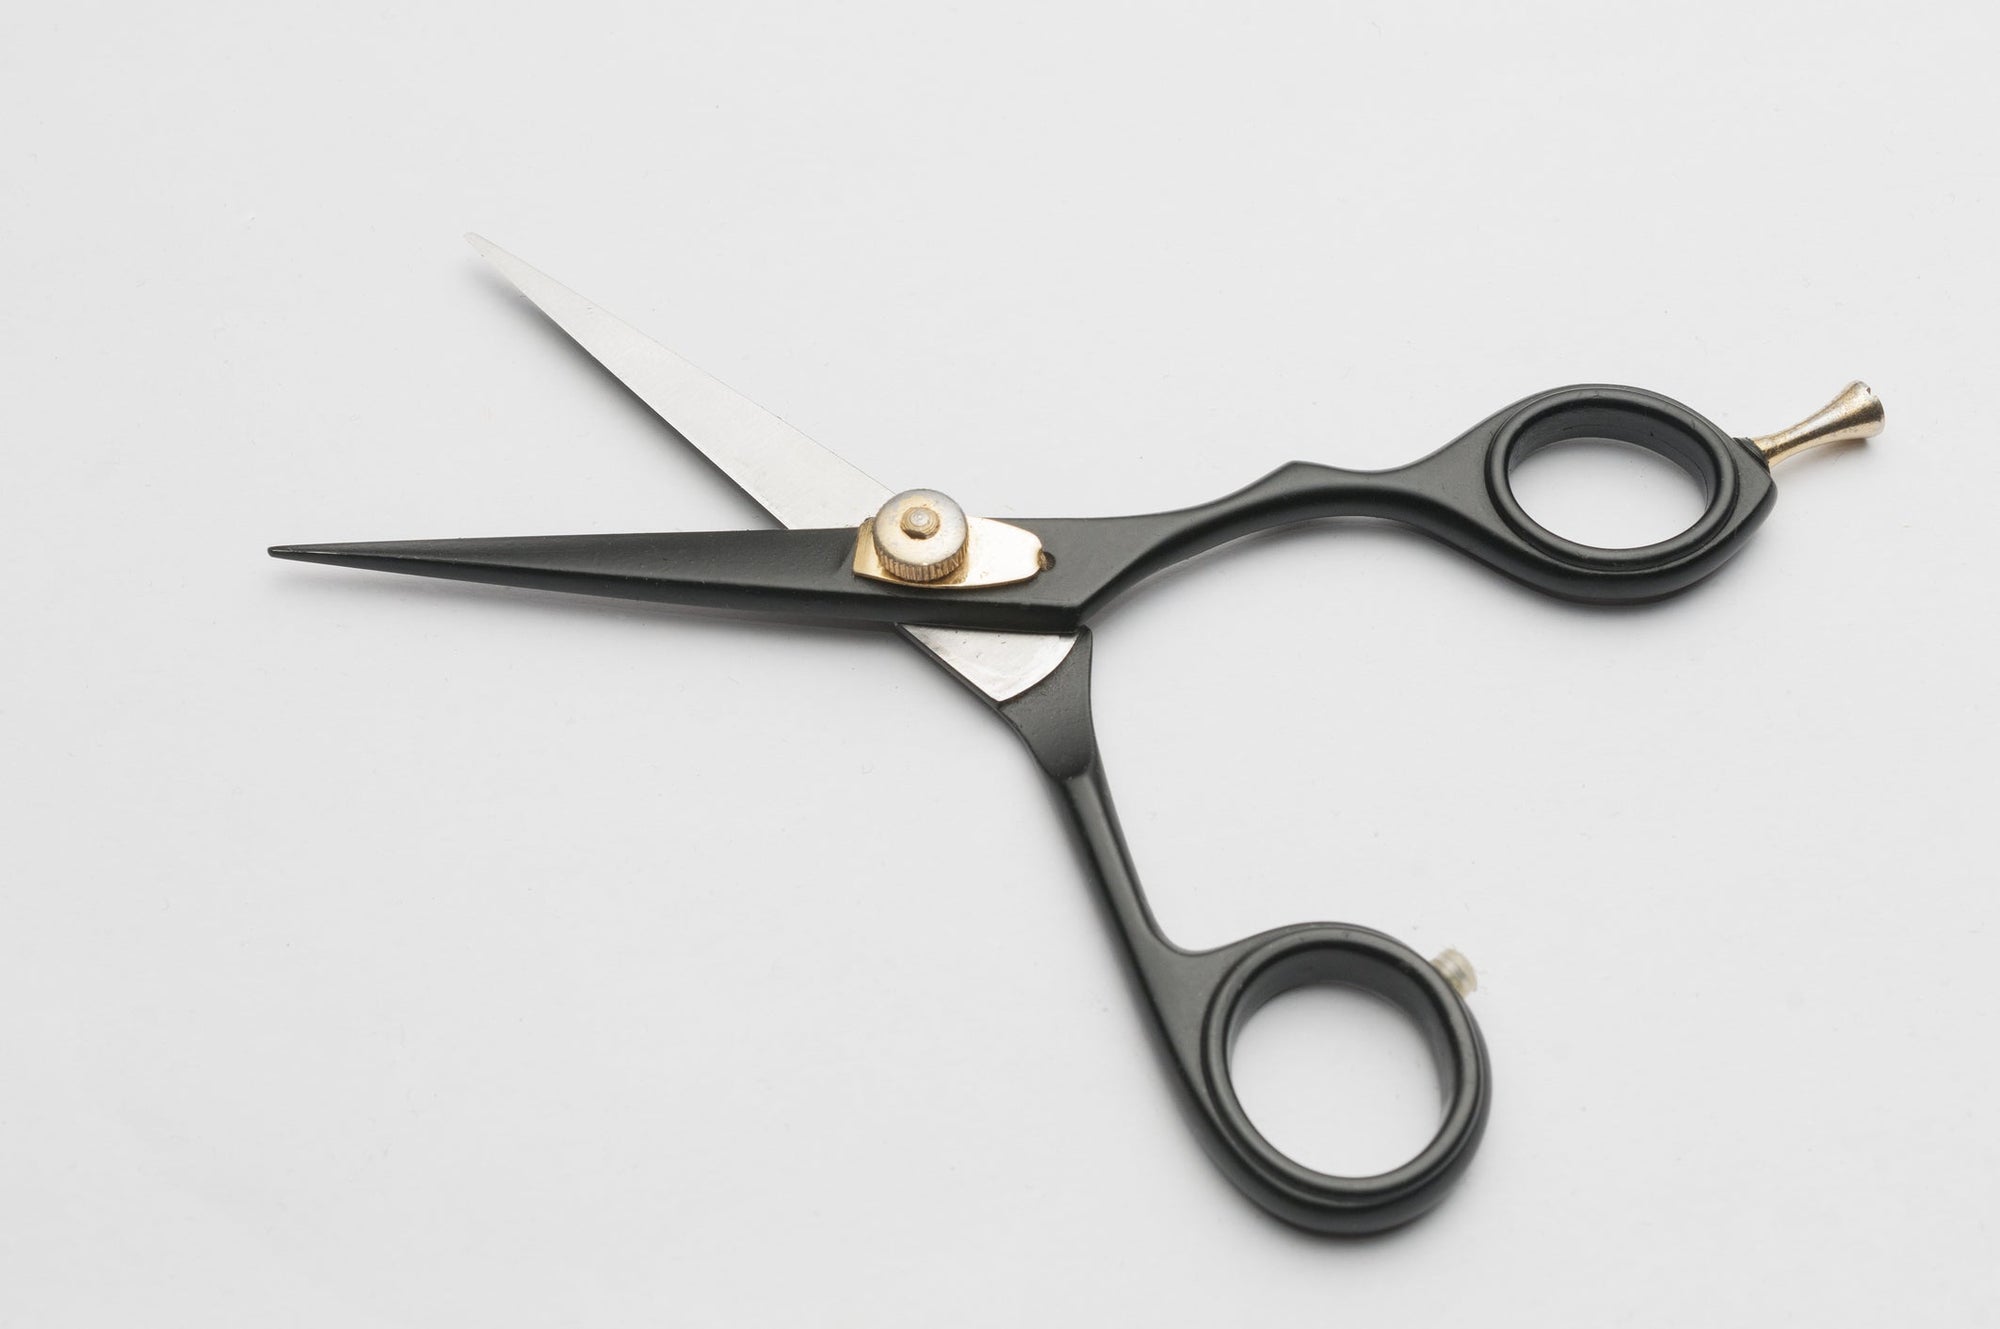 How to Choose Scissors for Cutting Extensions or Wigs – Ninja Scissors